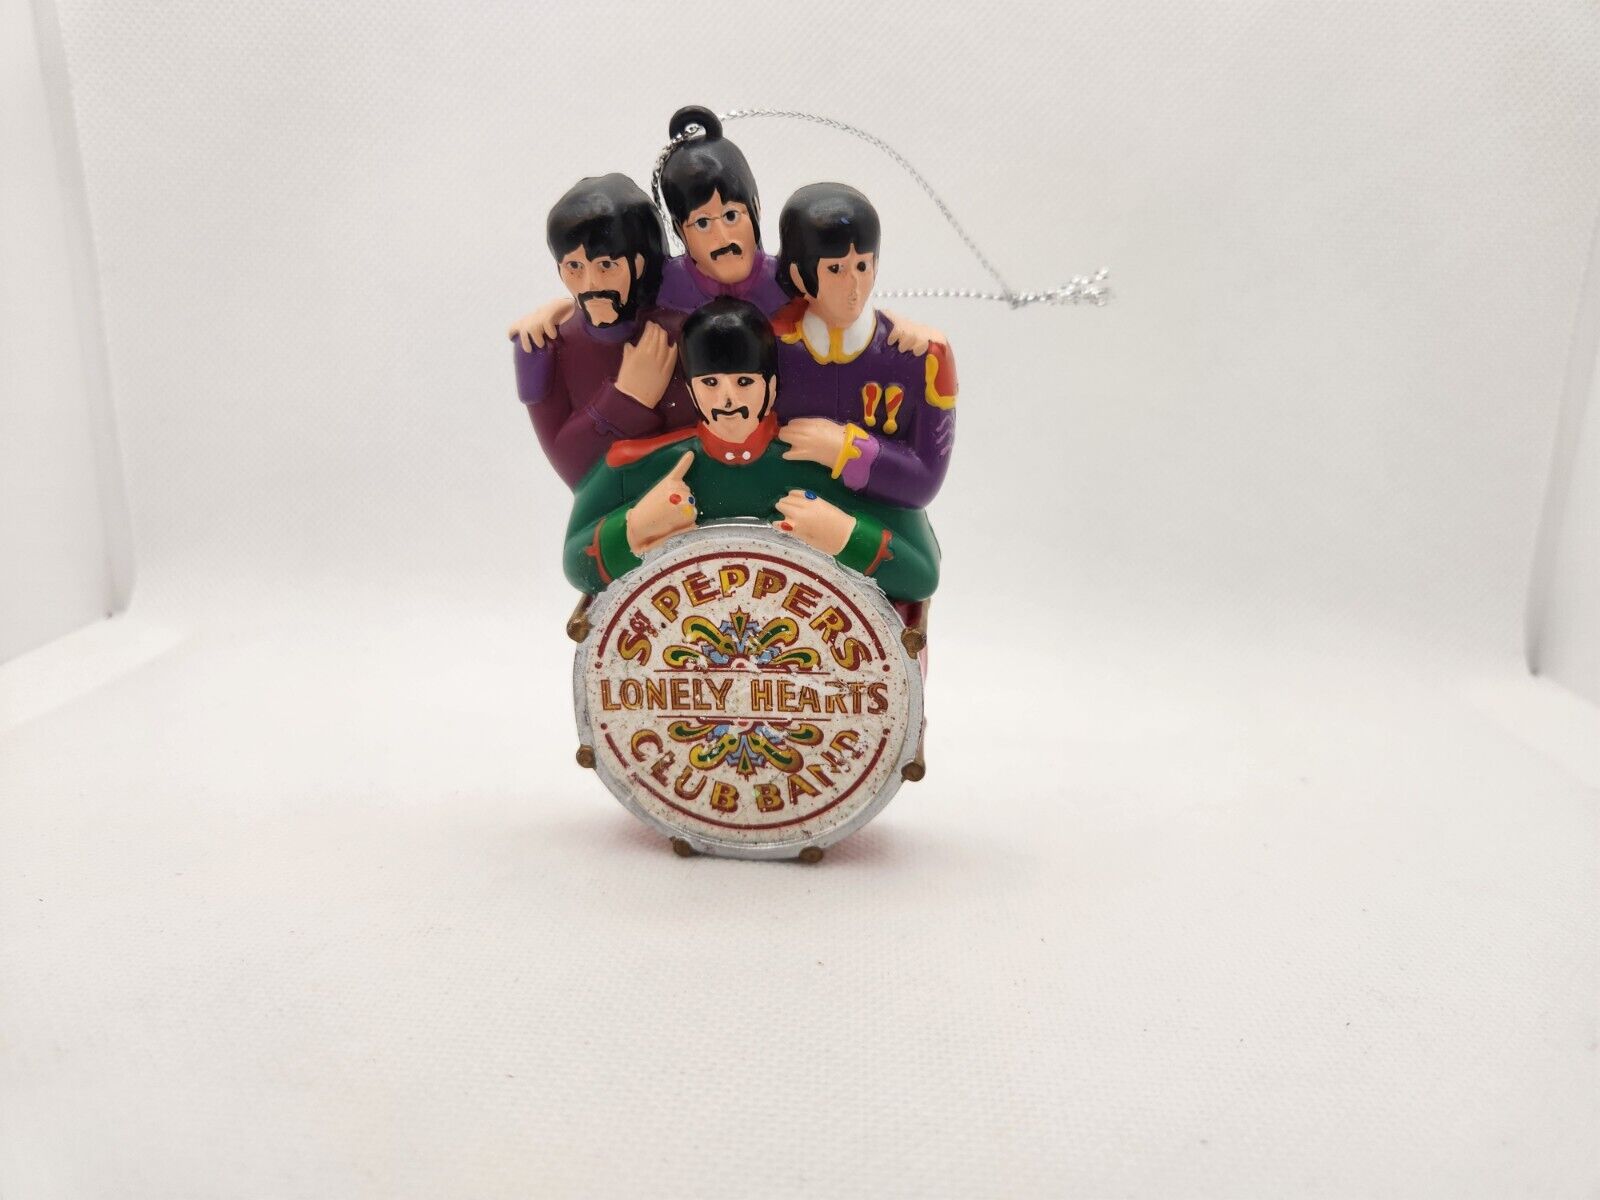 Beatles Sgt Peppers Lonely Hearts Club Drum Ornament 2013 Yellow Submarine